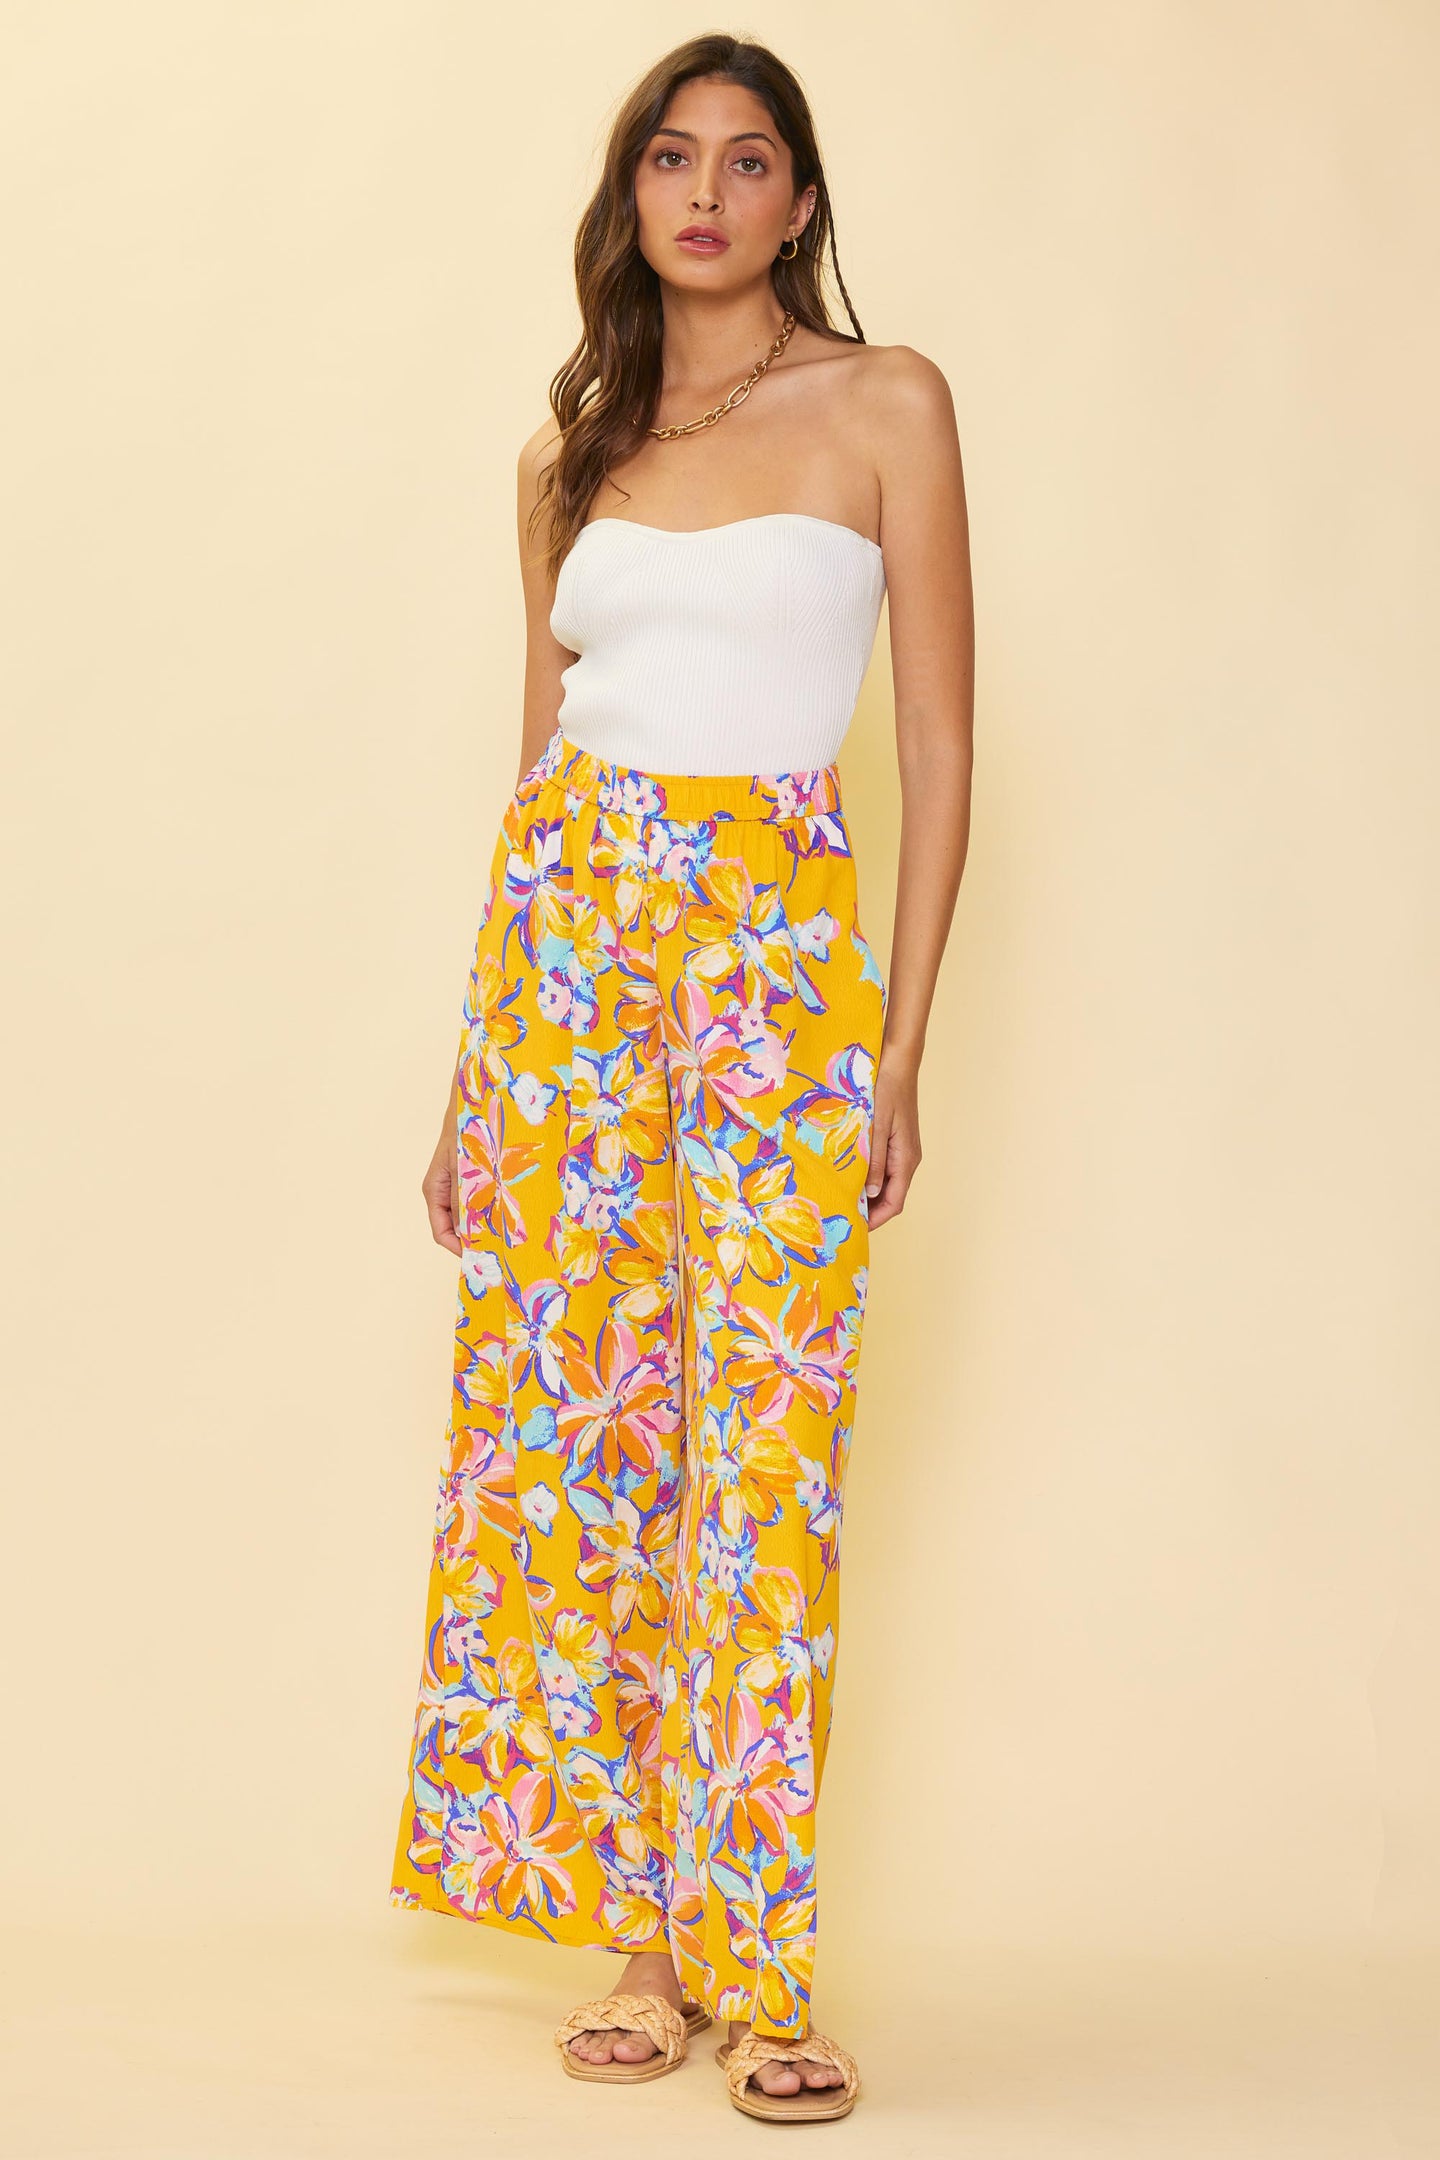 BLUE FLORAL Print Palazzo Pants. Comfy Formal Events/ Cruise